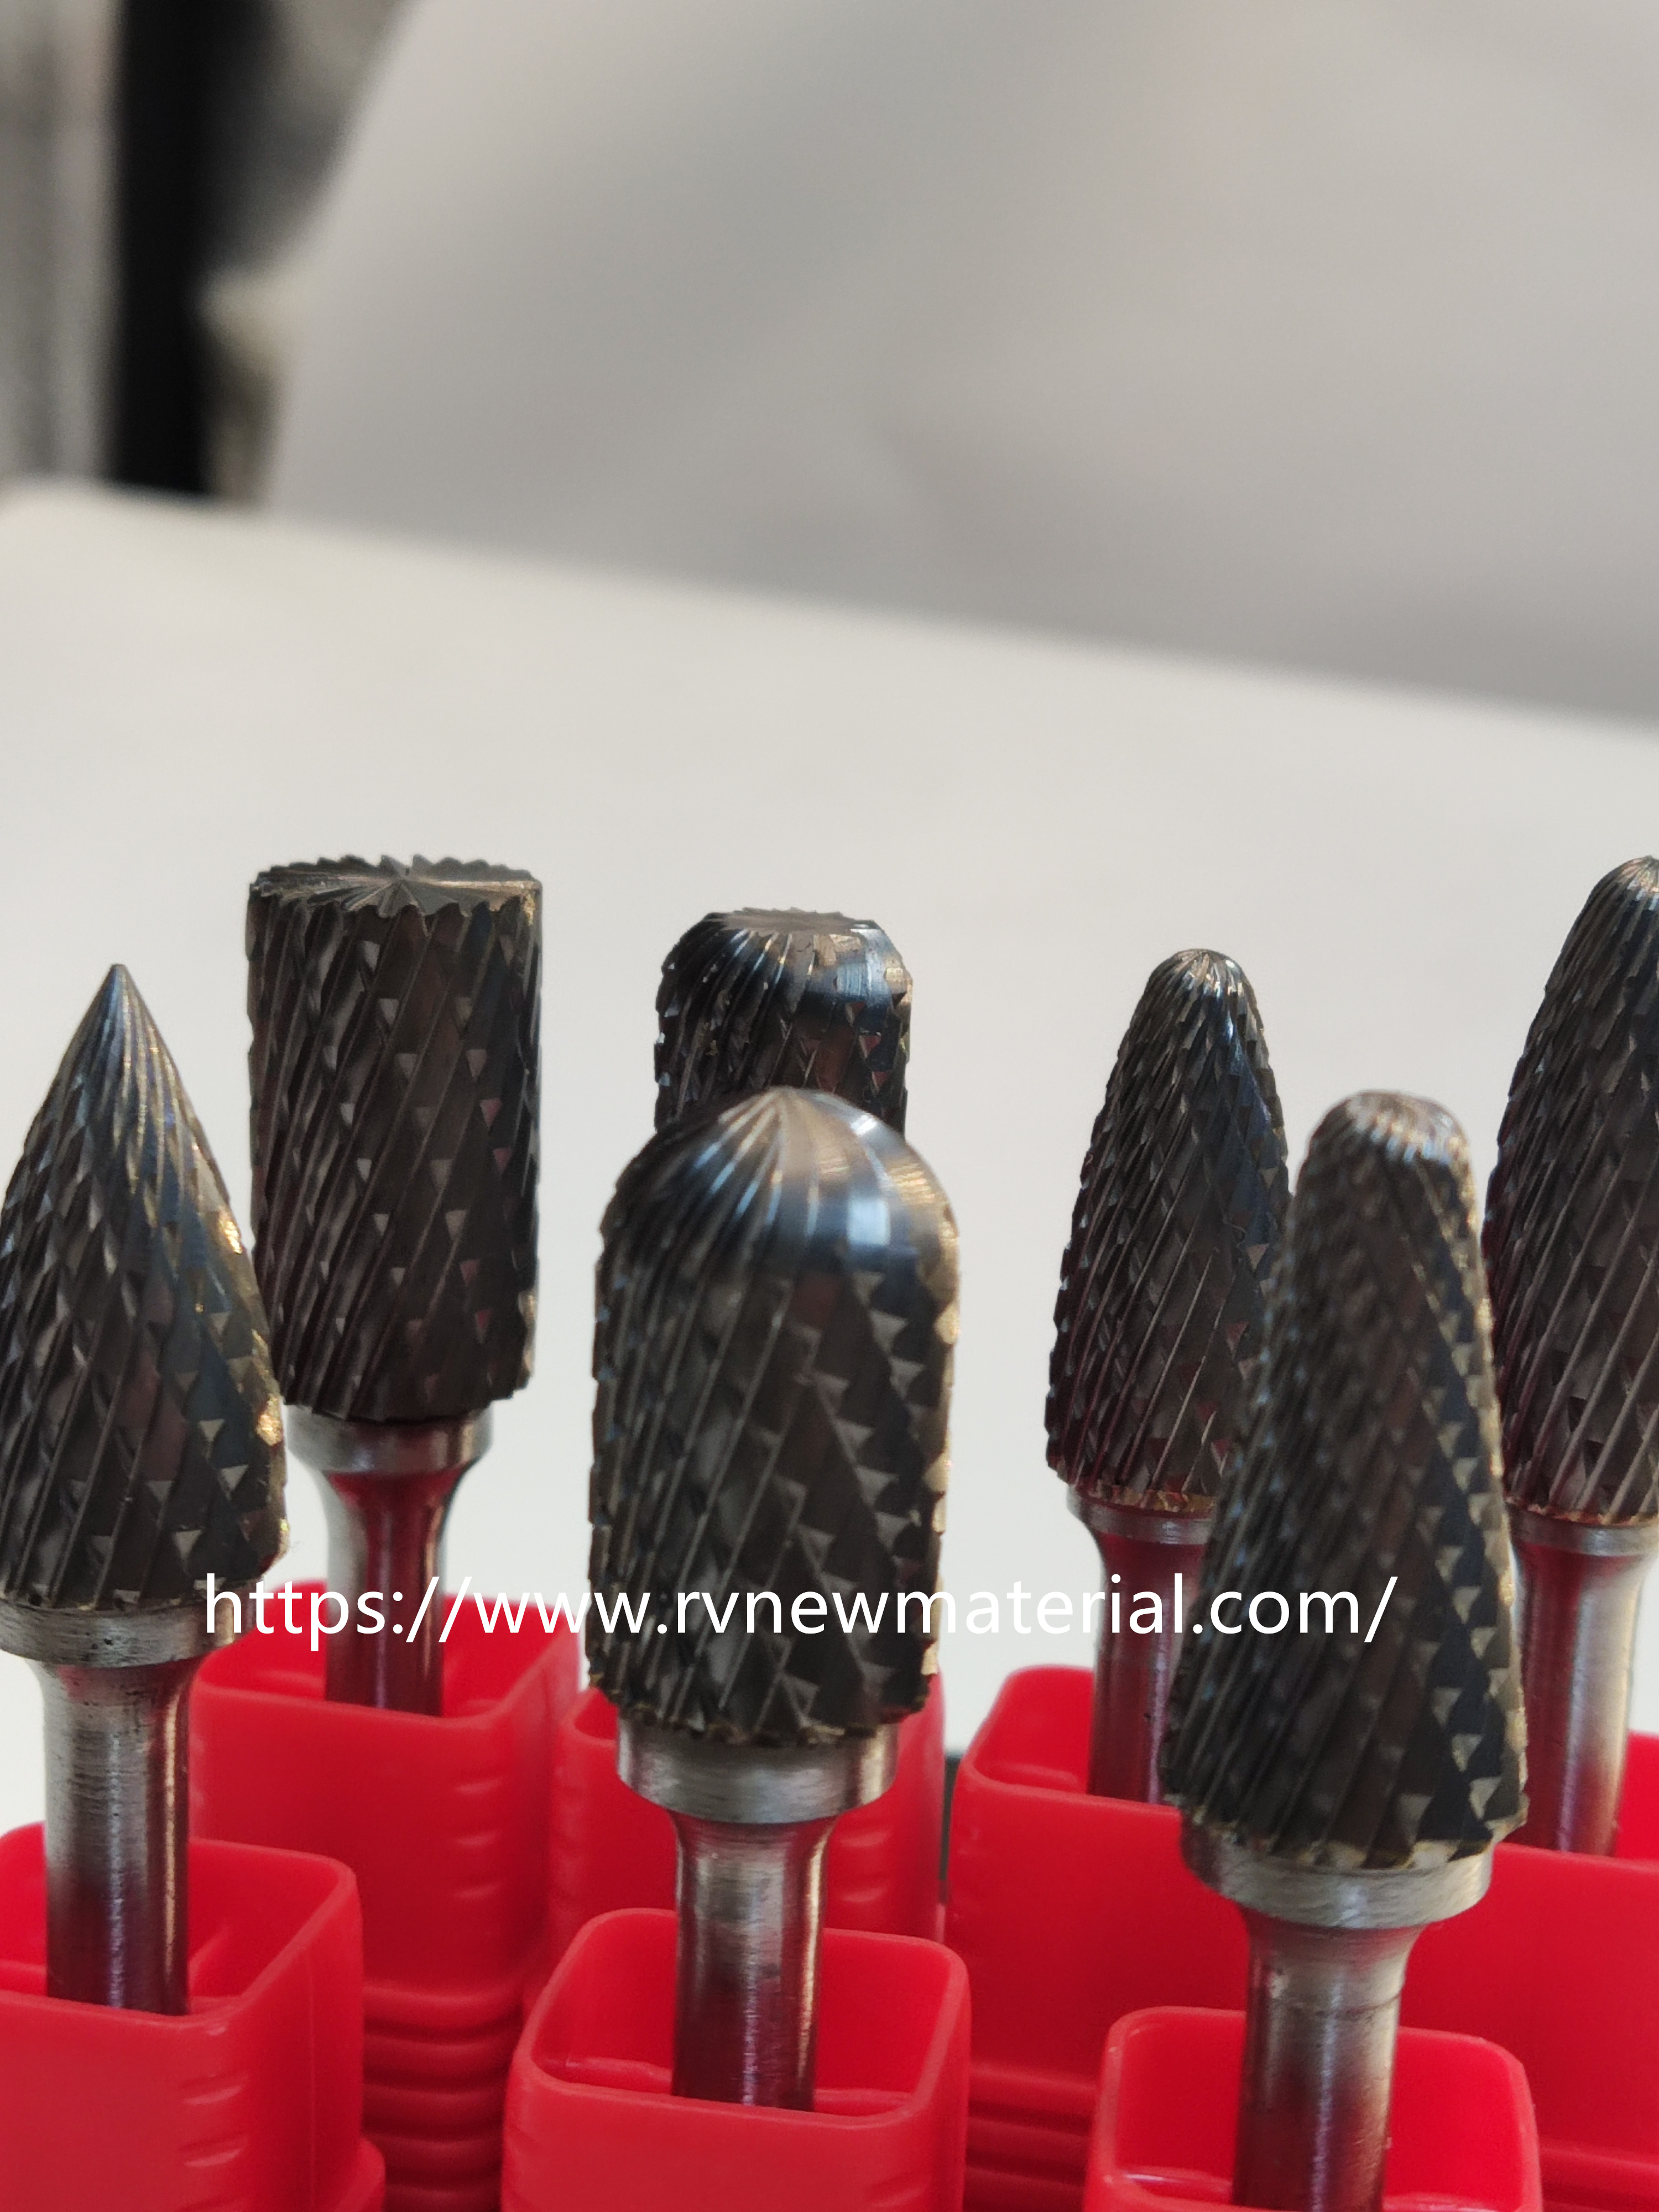 Tungsten Carbide Rotary Files Milling Cutter Cutting Tool